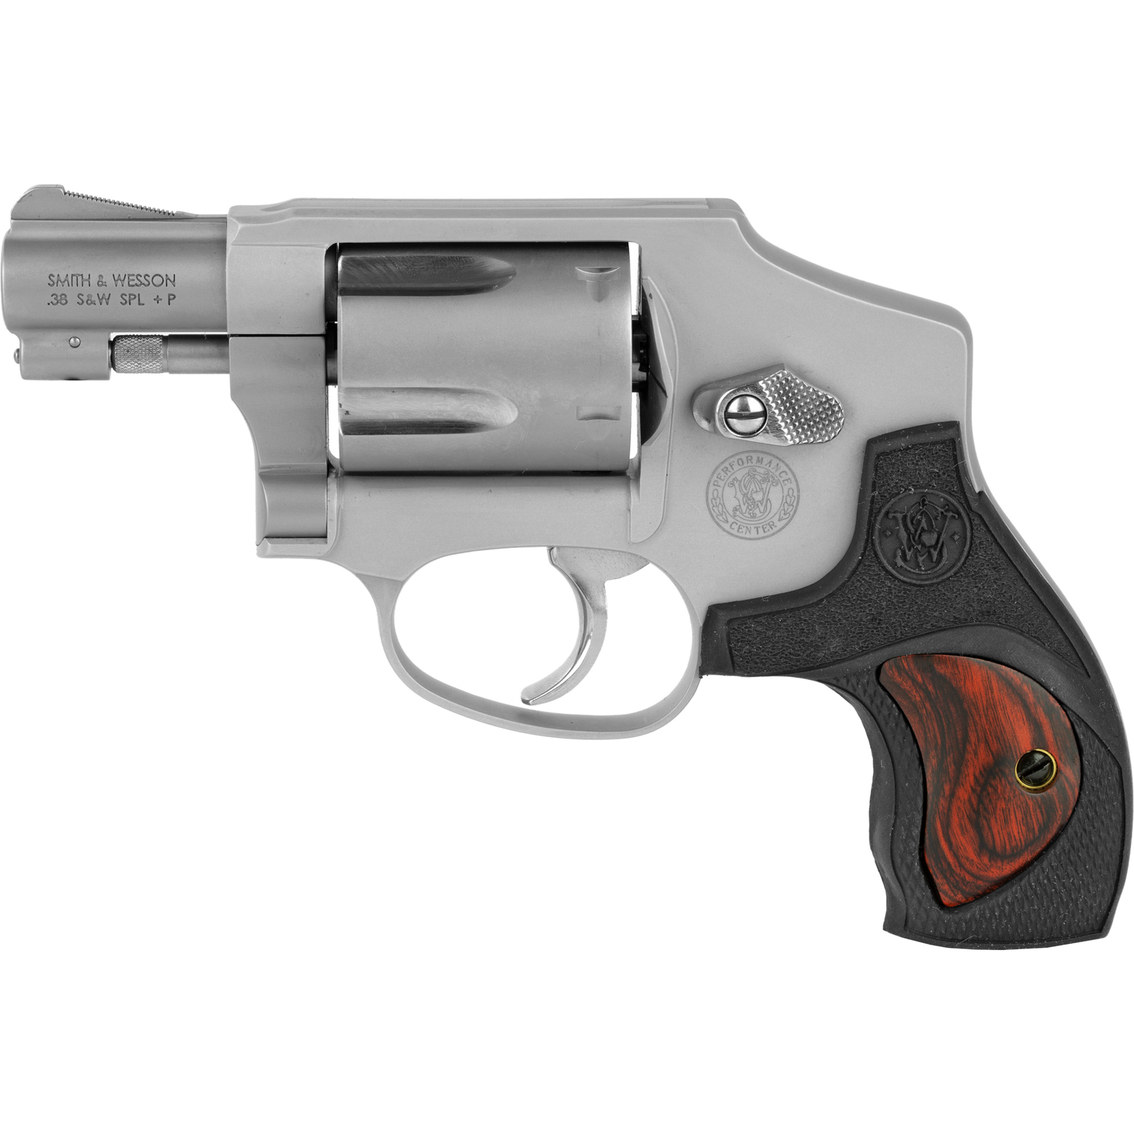 S&W 642 Performance Center 38 Special 1.875 in. Barrel 5 Rds Revolver Desert Tan - Image 2 of 3